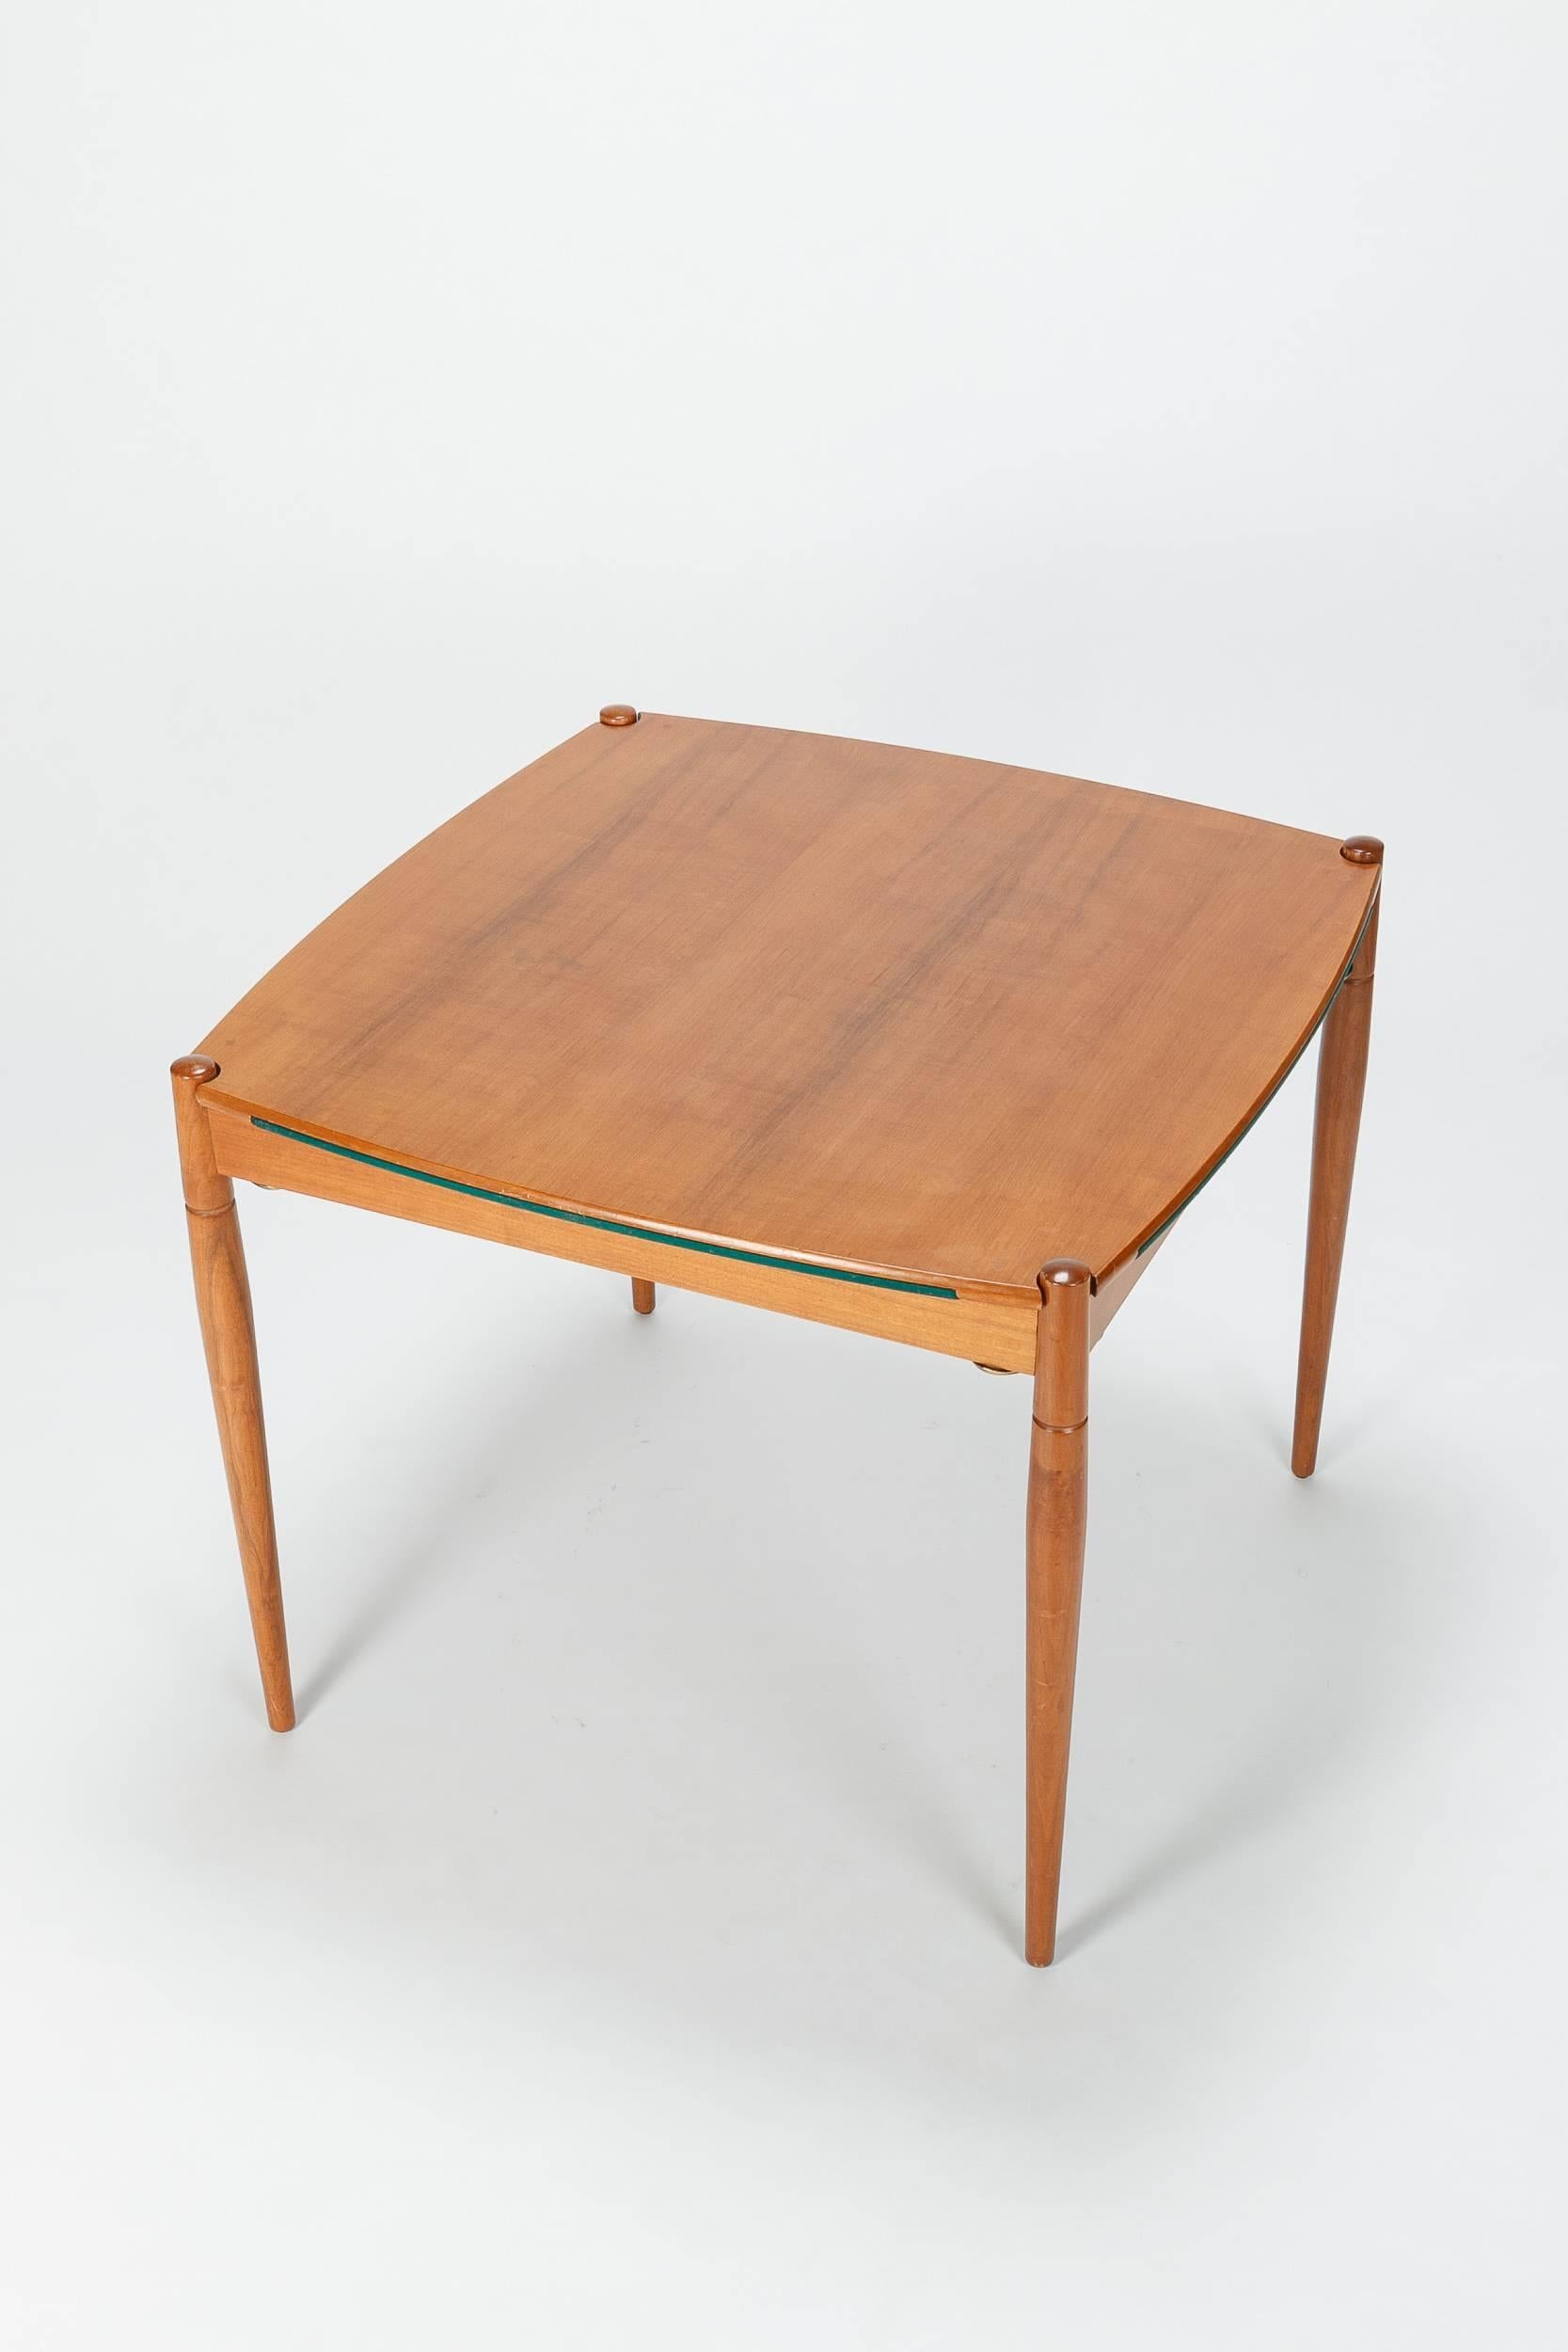 Wonderful and well-known Gio Ponti game table designed in 1958 and manufactured by Fratelli Reguitty in Italy. The table is made of beech and has a reversible tabletop in veneered walnut and a green felt top with storage space underneath. Each